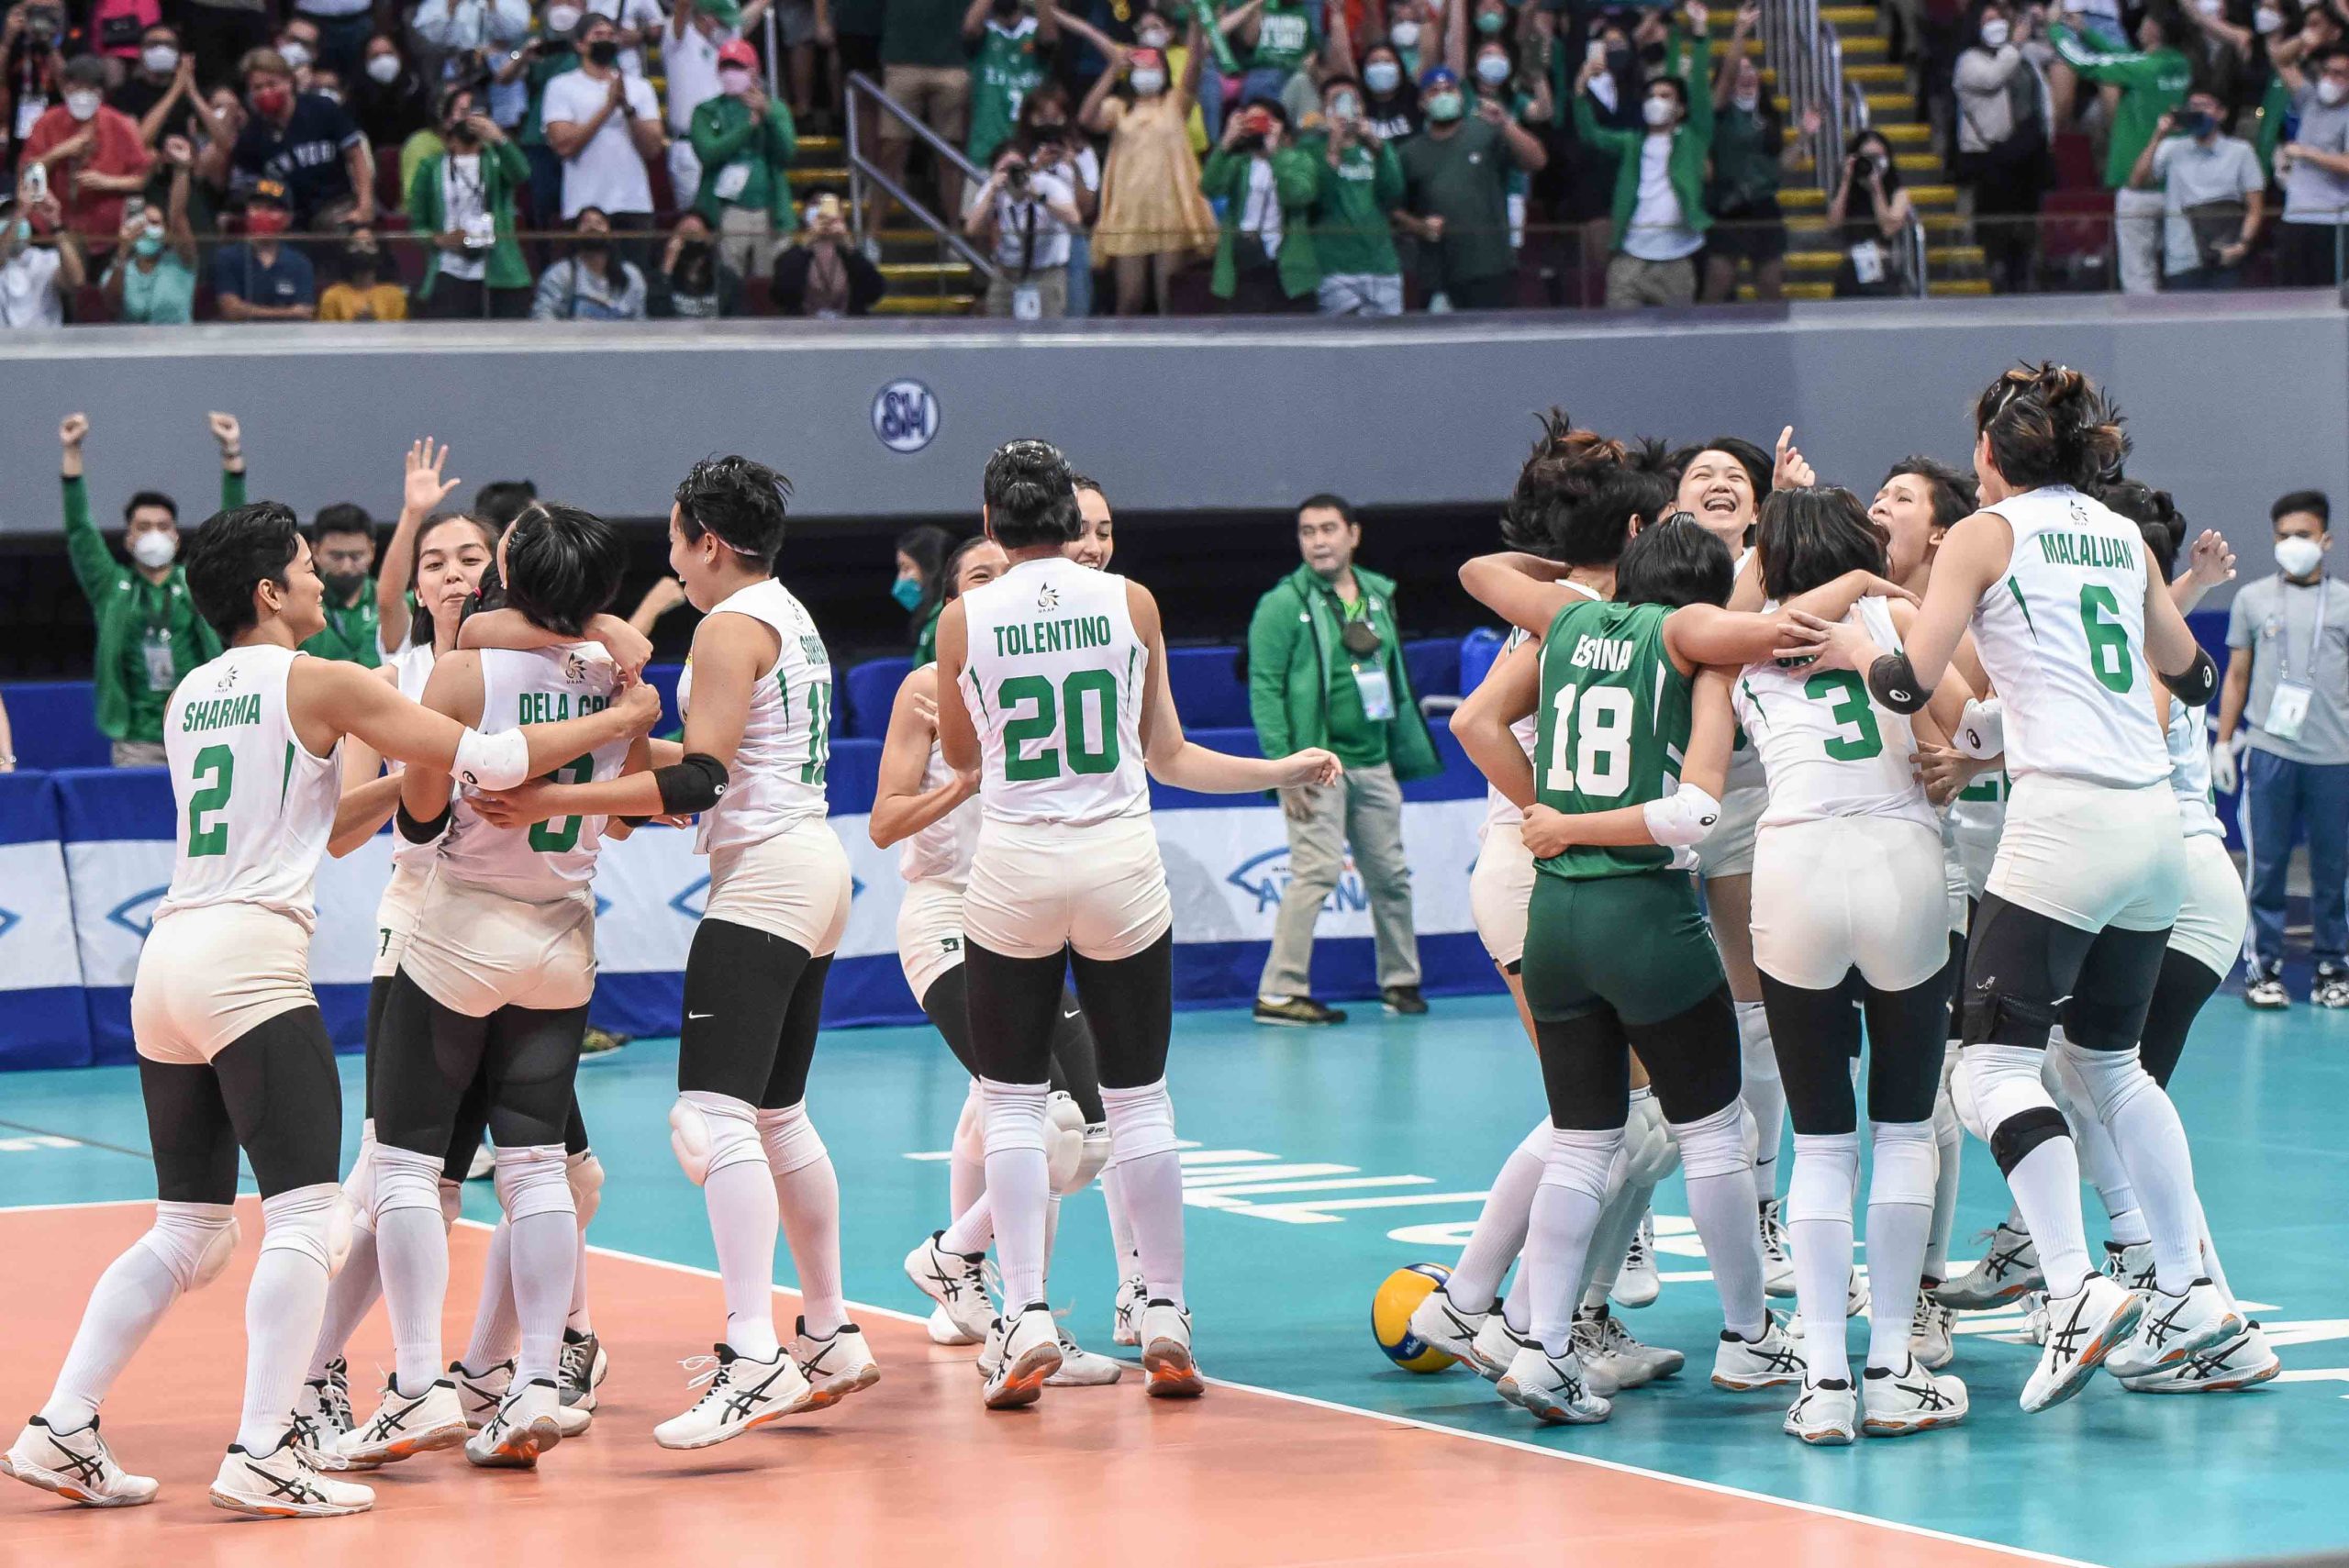 La Salle Lady Spikers celebrate victory over Ateneo that brought them back to the UAAP Finals.